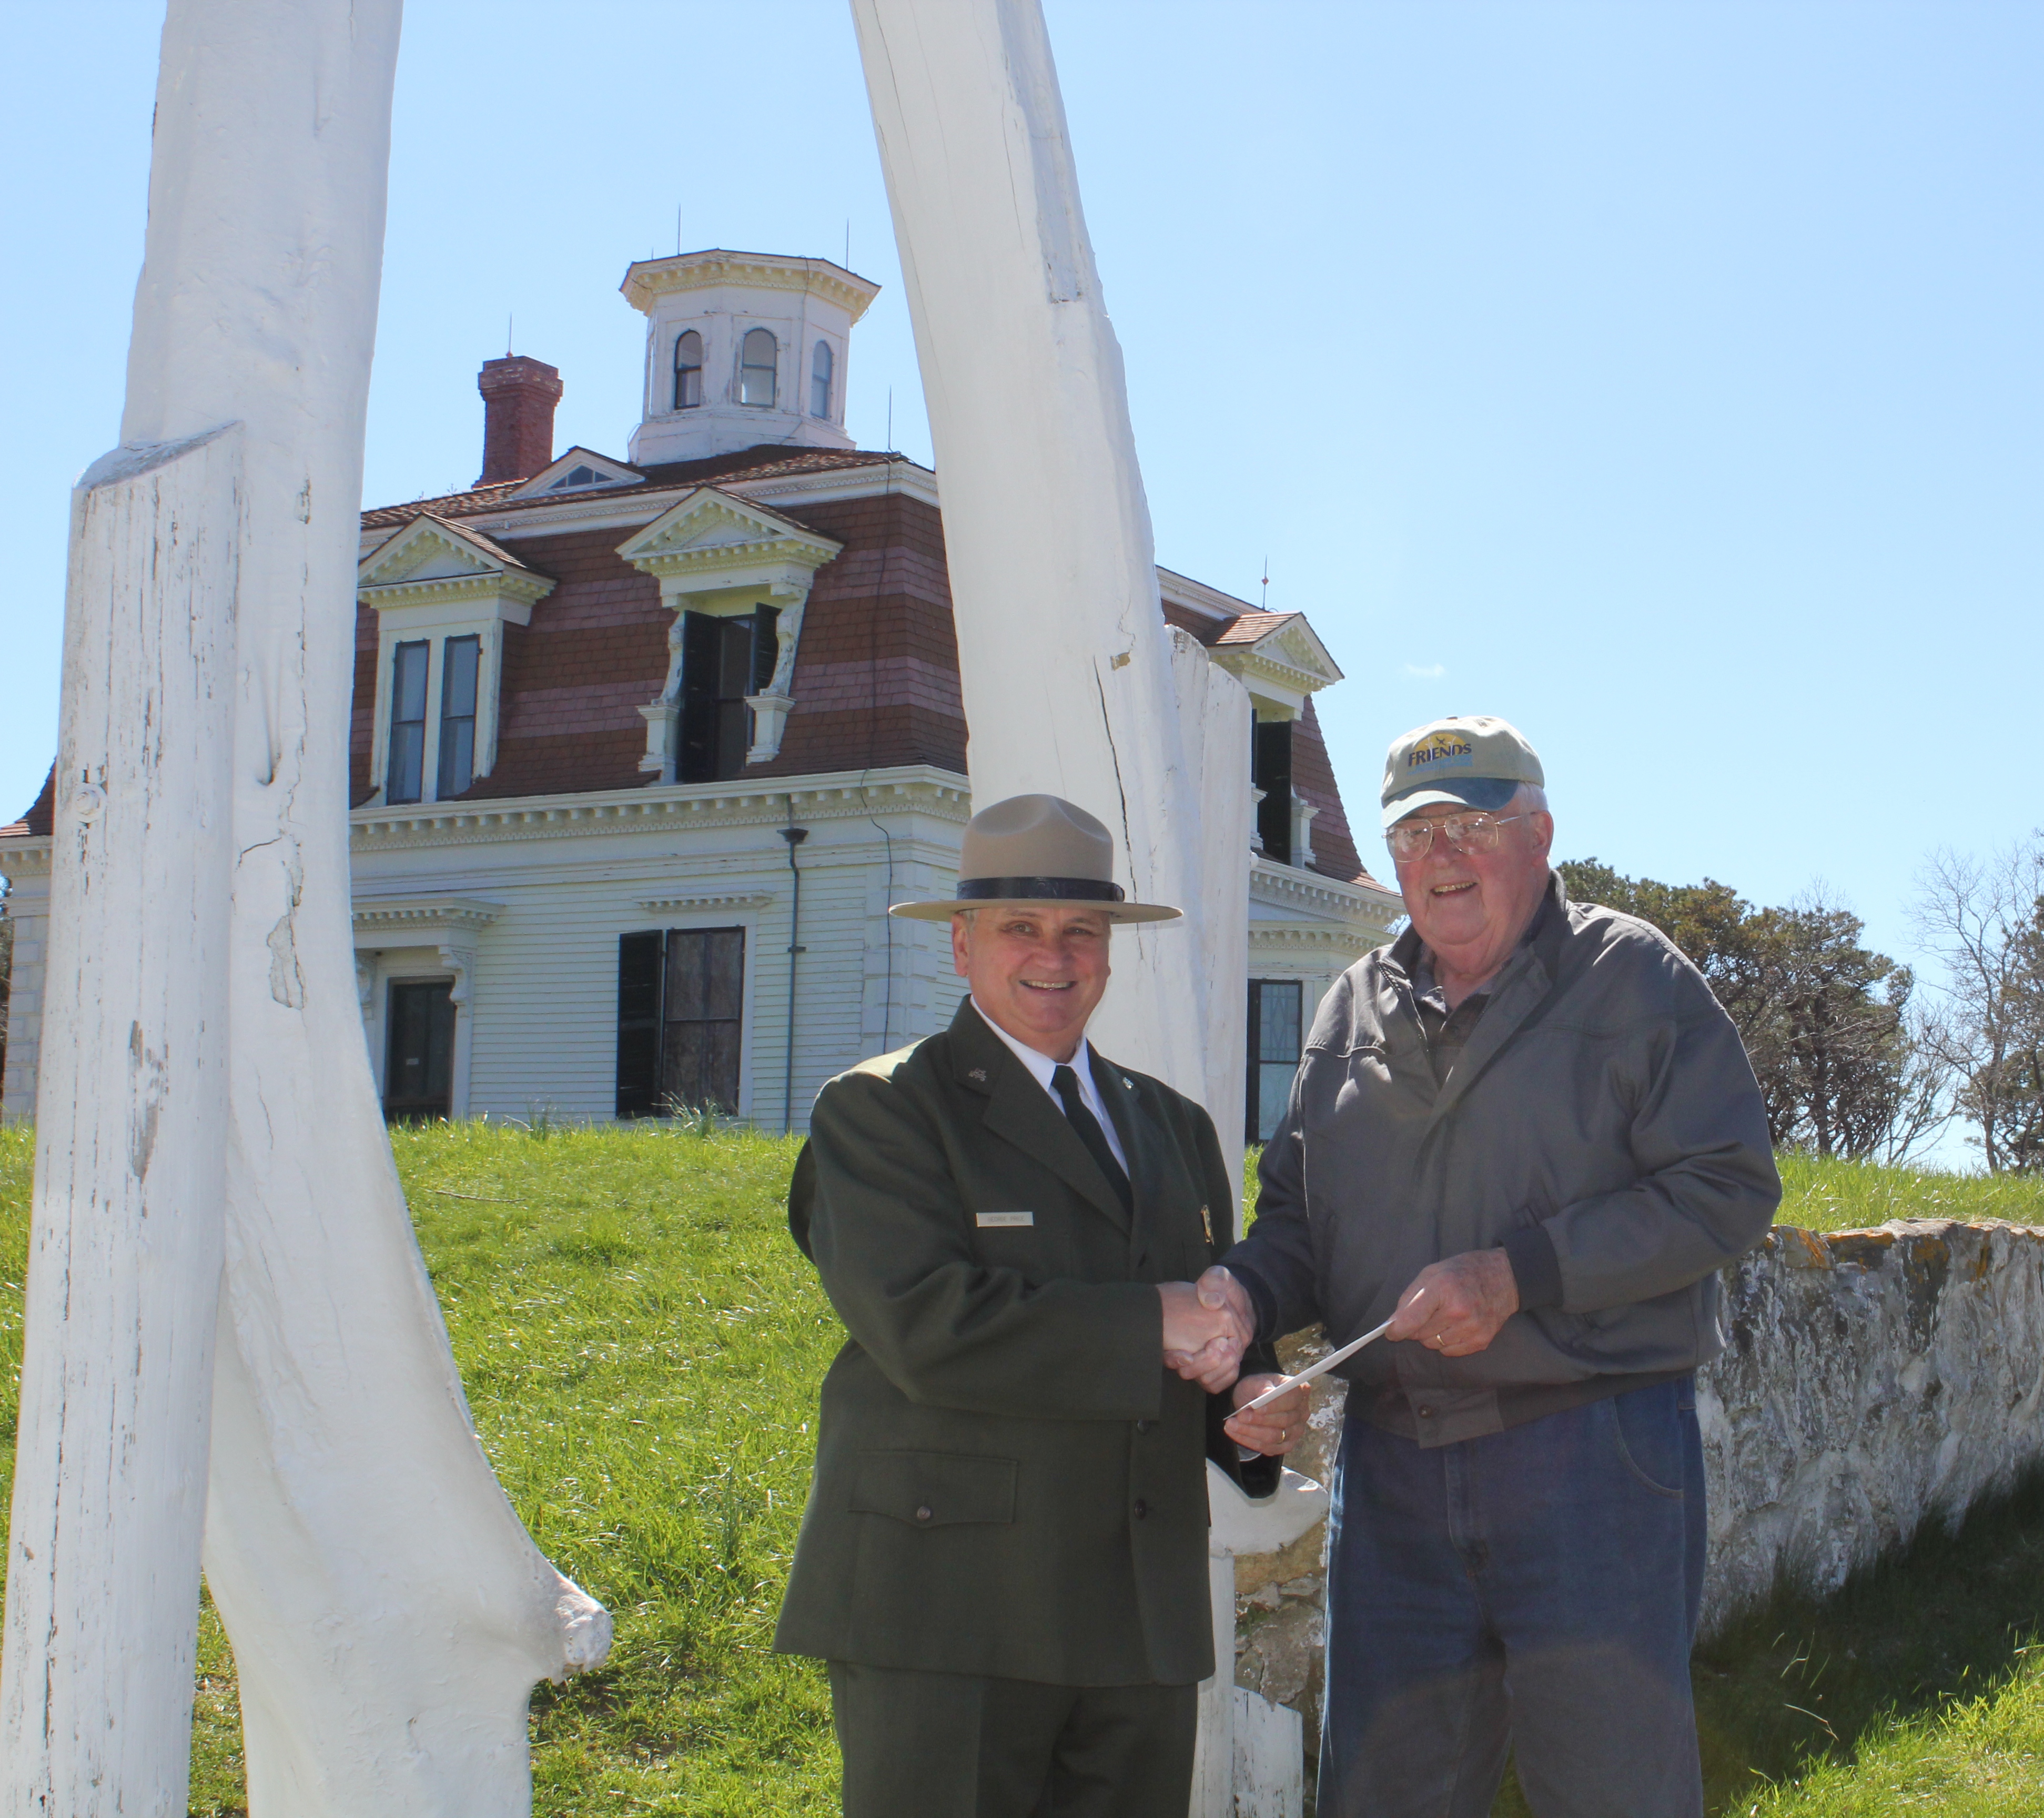 Richard G. Ryder, President of the Friends of Cape Cod National Seashore, hands Superintendent George Price a check for $100,000 as a partner match for the Centennial Challenge funding to repaint the Captain Edward Penniman House.